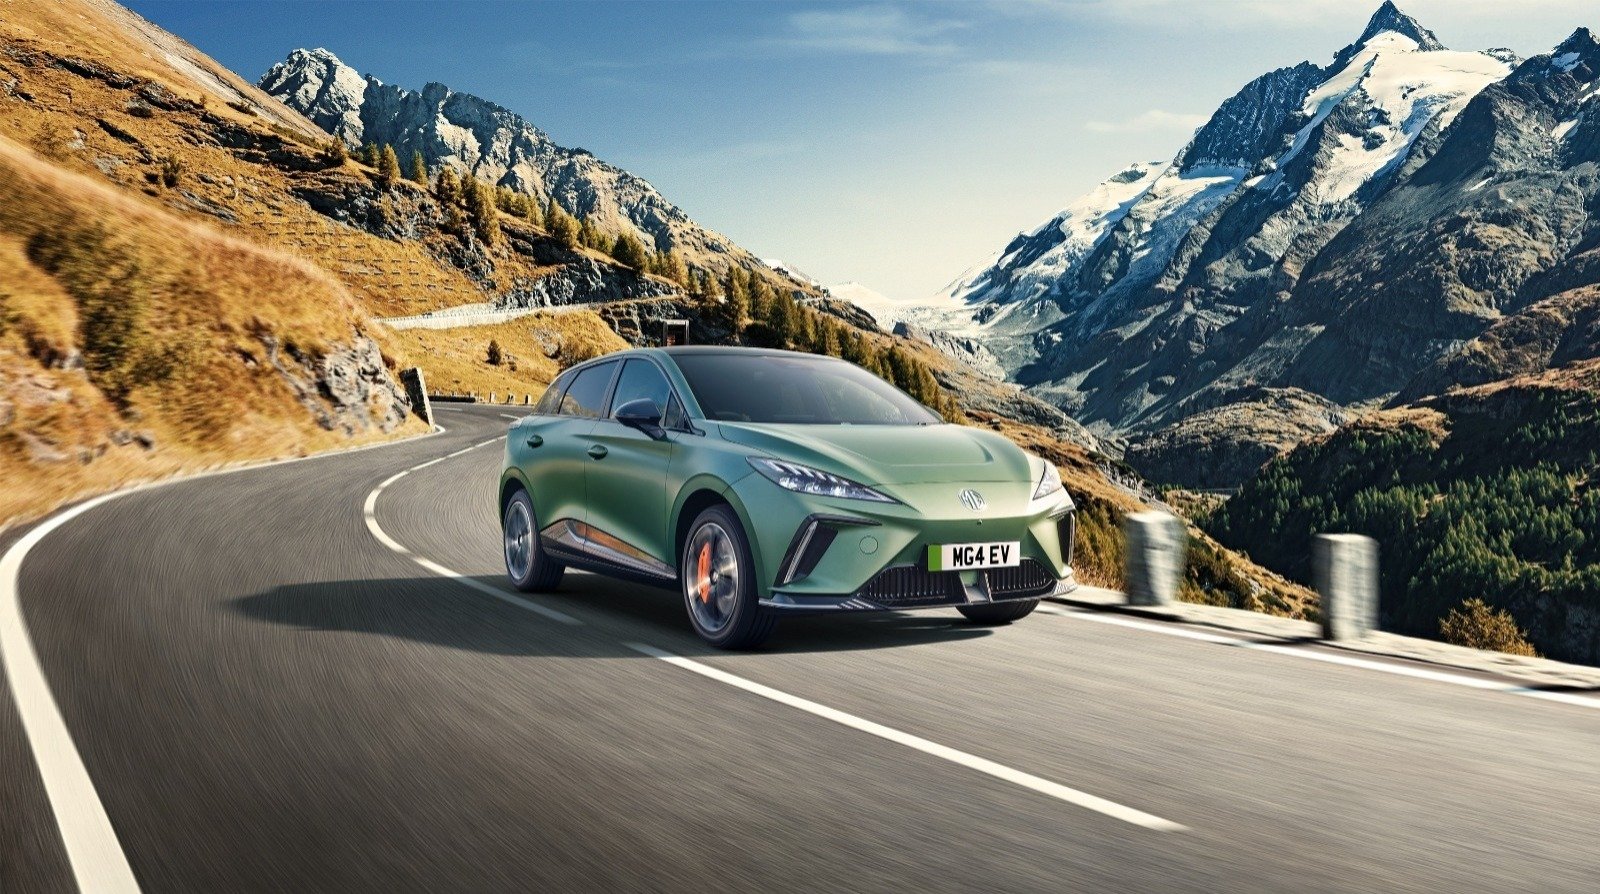 MG4 EV XPOWER available in the north west